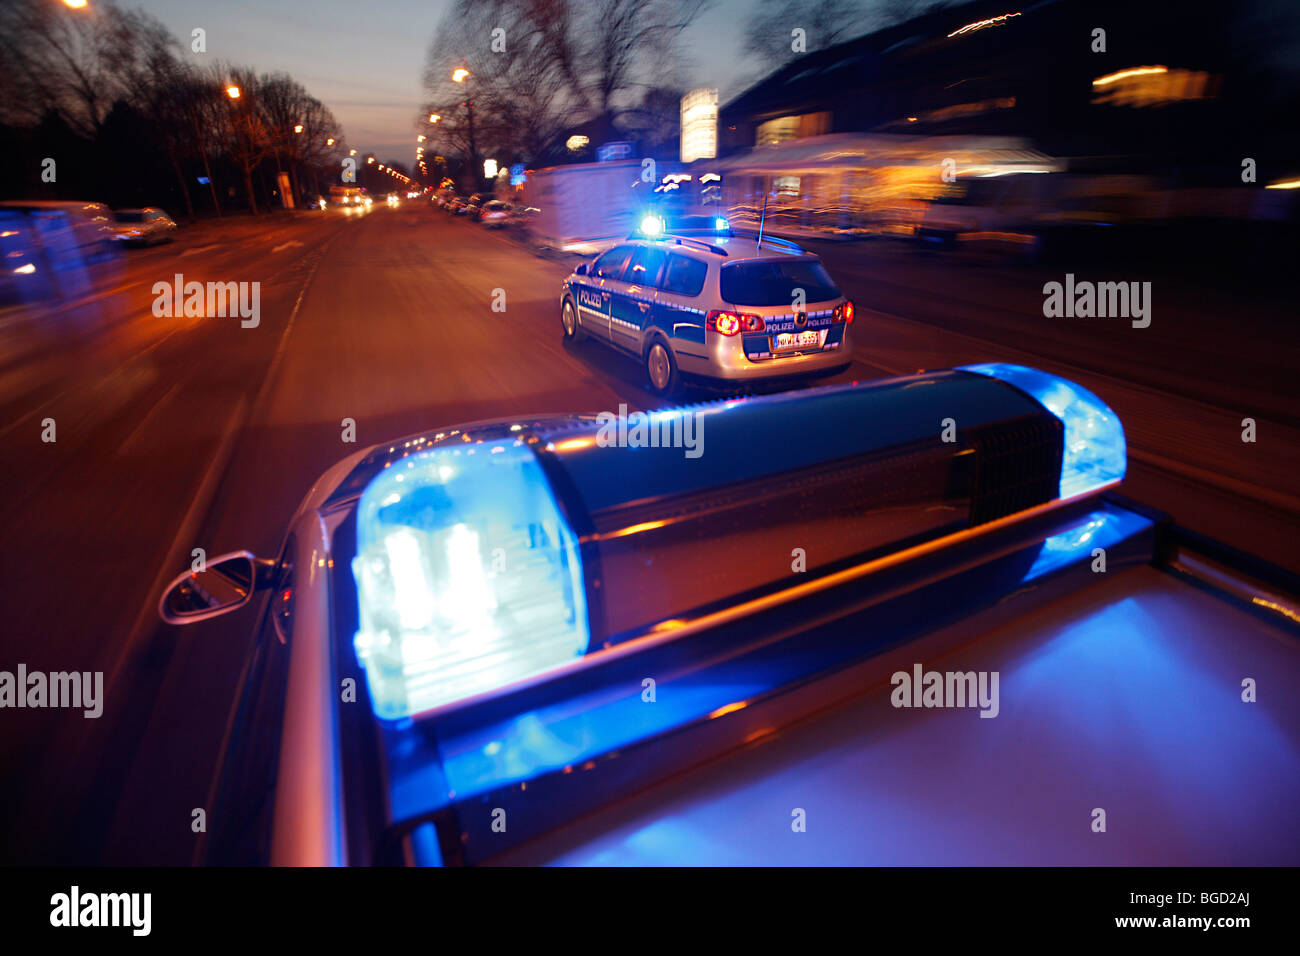 patrol car of the police in operation with blue lights switched on and siren, Germany, Europe. Stock Photo